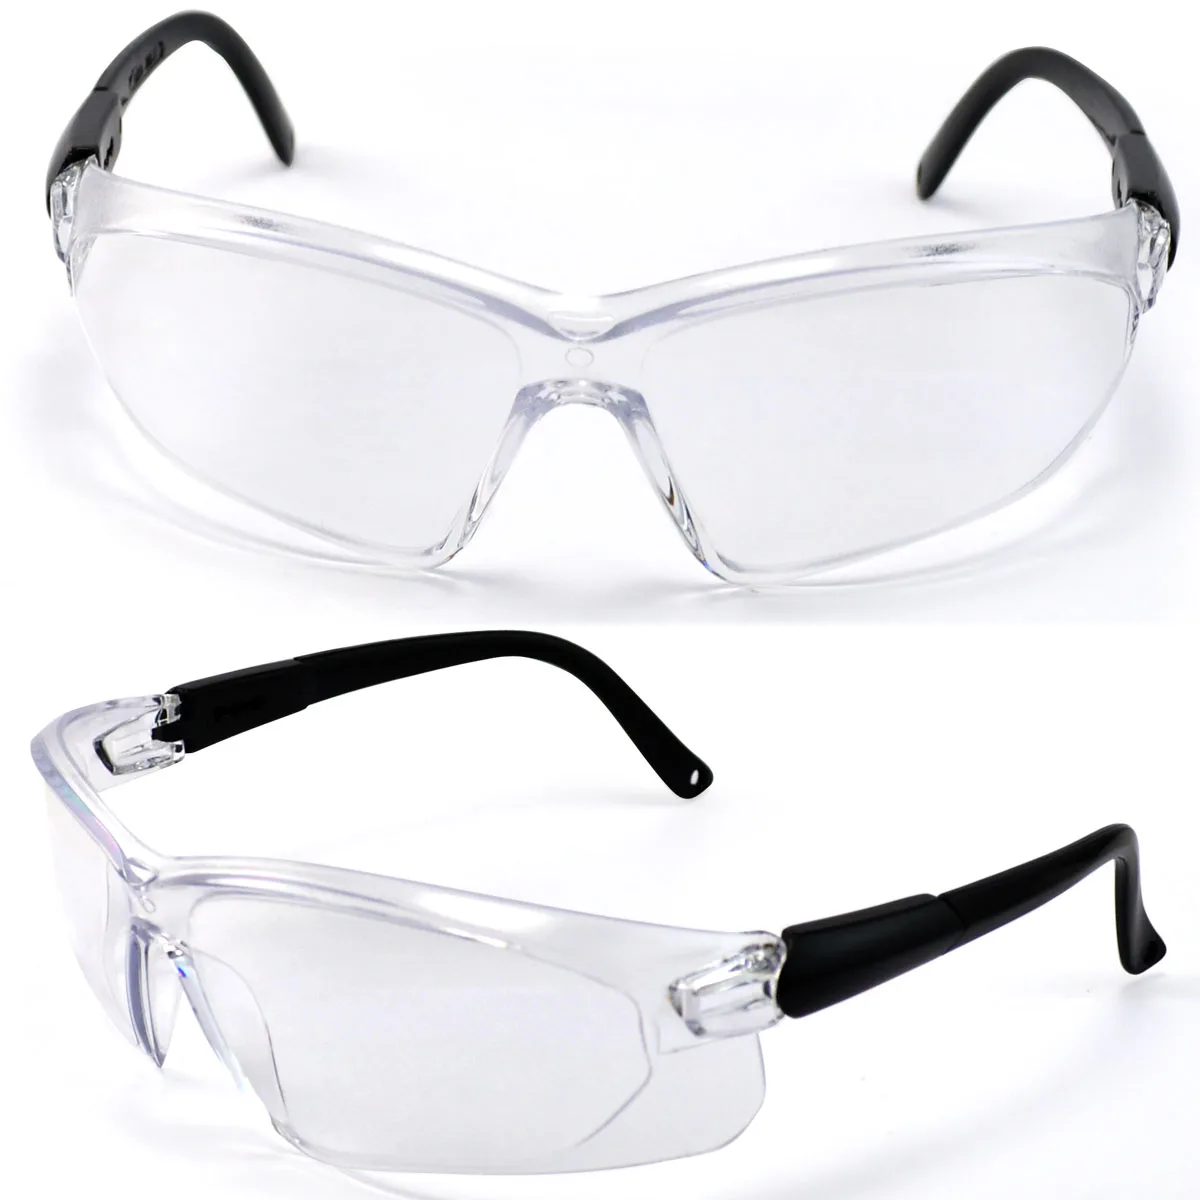 
Clear Ansi Z87.1 Industrial Protective Safety Glasses Construction En166 Anti Fog Safety Glasses 